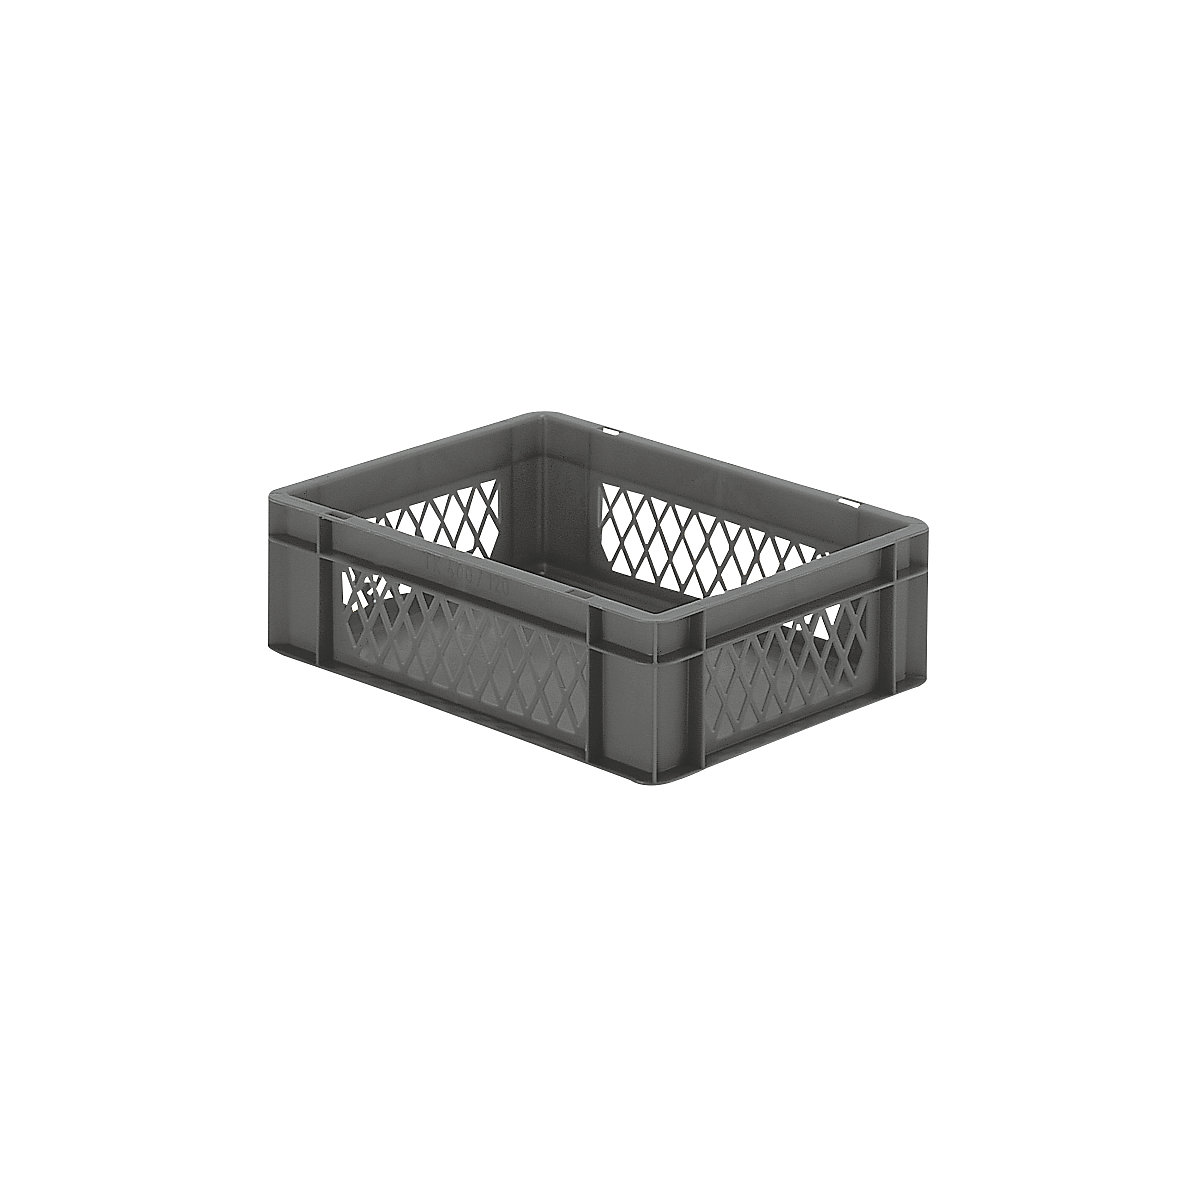 Euro stacking container, perforated walls, closed base, LxWxH 400 x 300 x 120 mm, grey, pack of 5